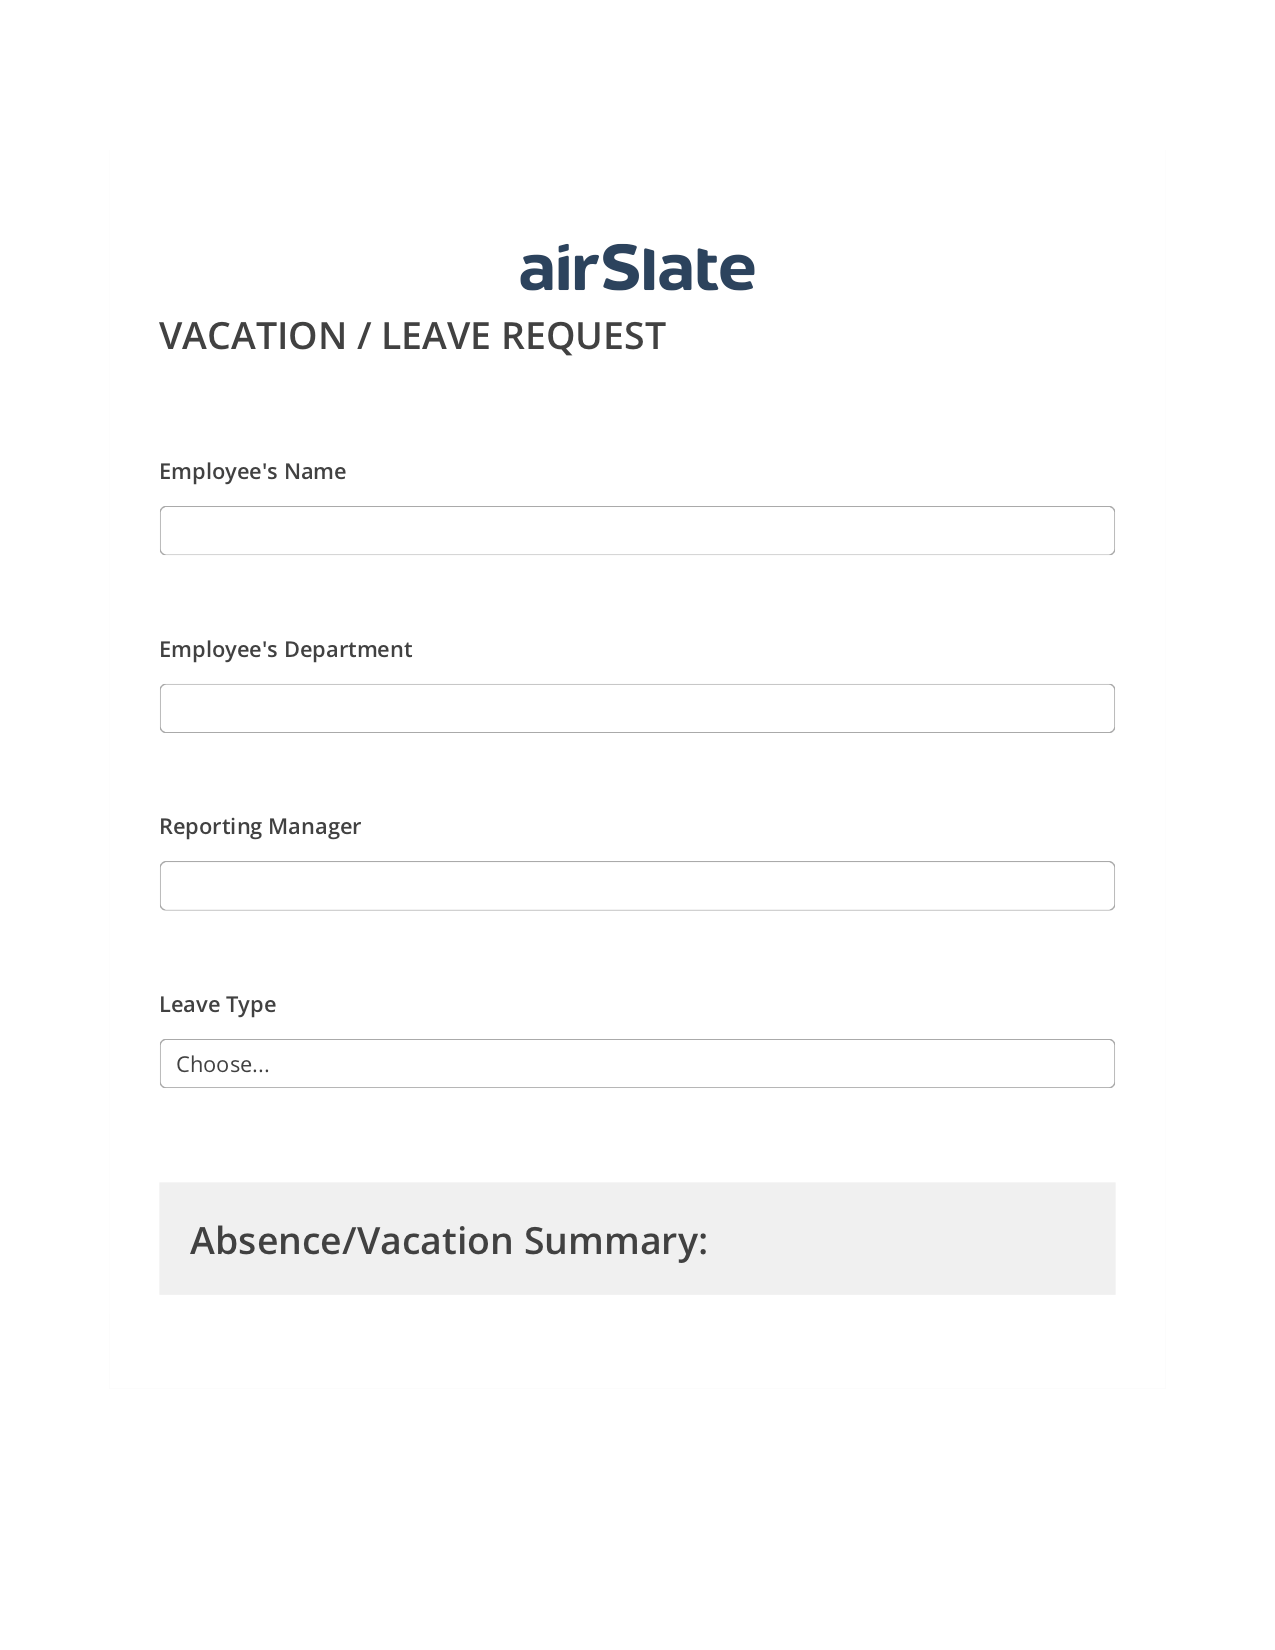 Vacation/Leave Request Workflow System Bot - Slack Two-Way Binding Bot, Email Notification Bot, Archive to SharePoint Folder Bot